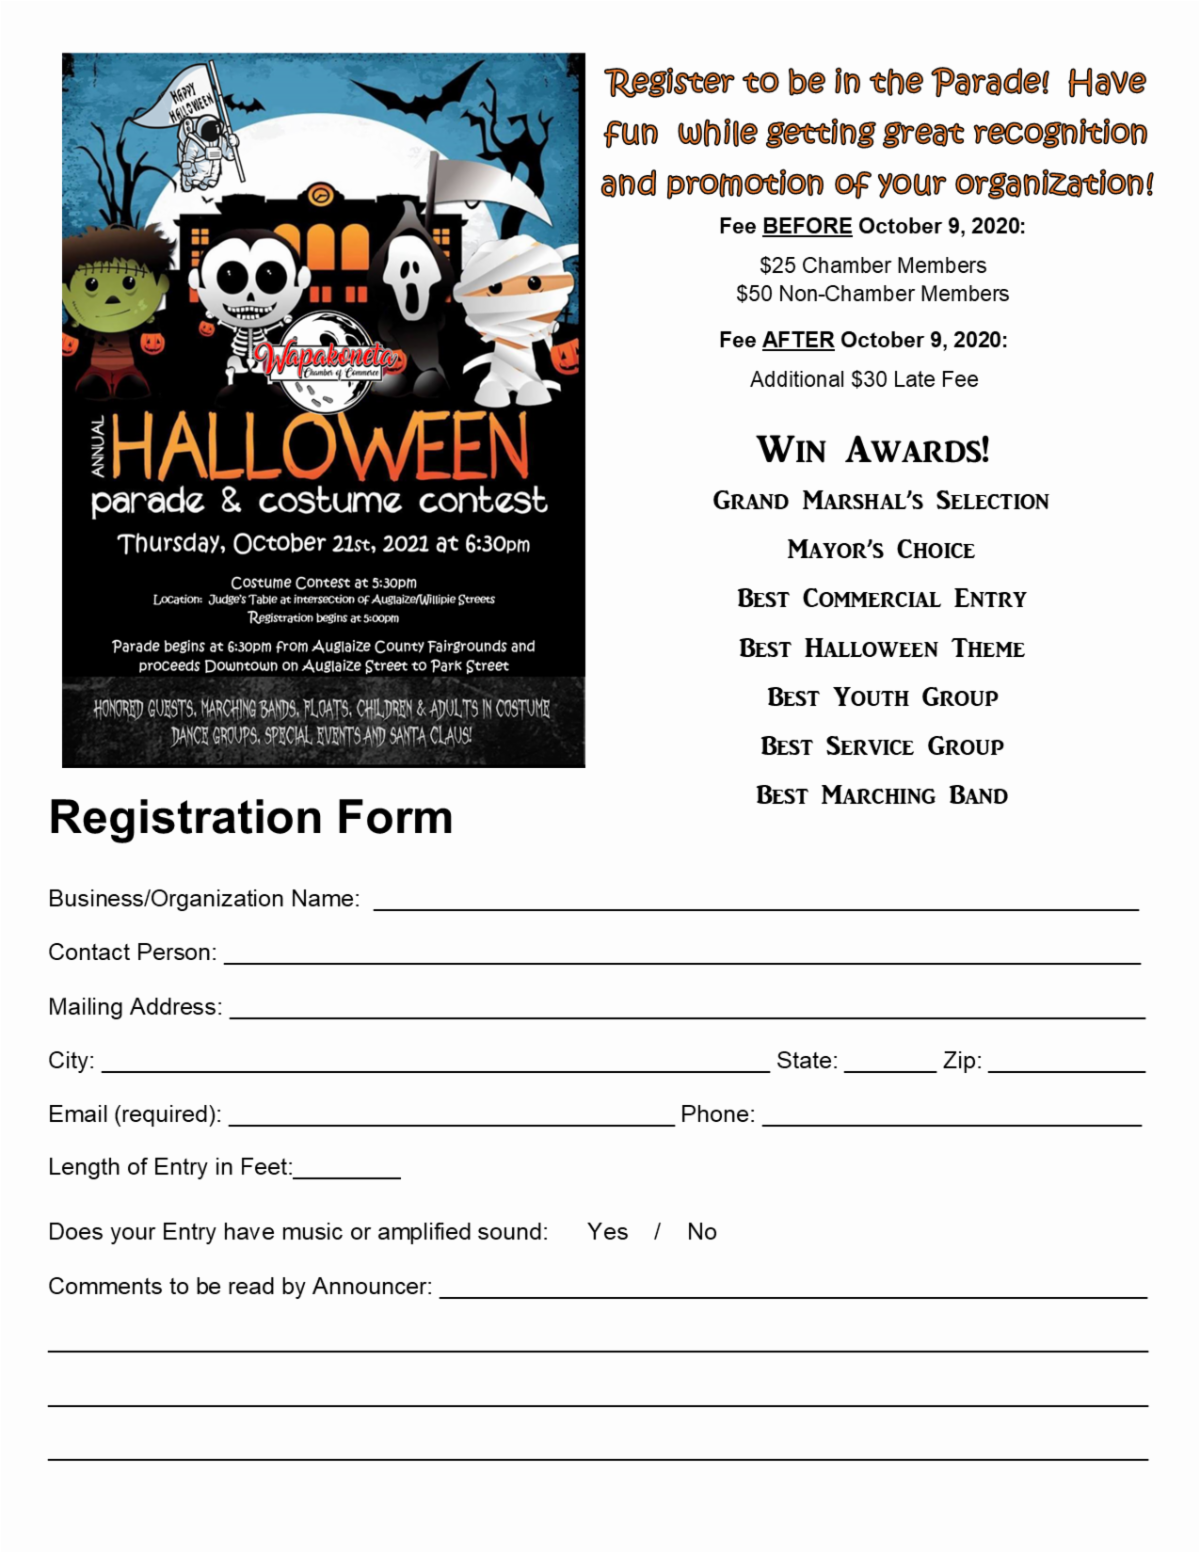 Halloween Parade & Costume Contest Greater Grand Lake